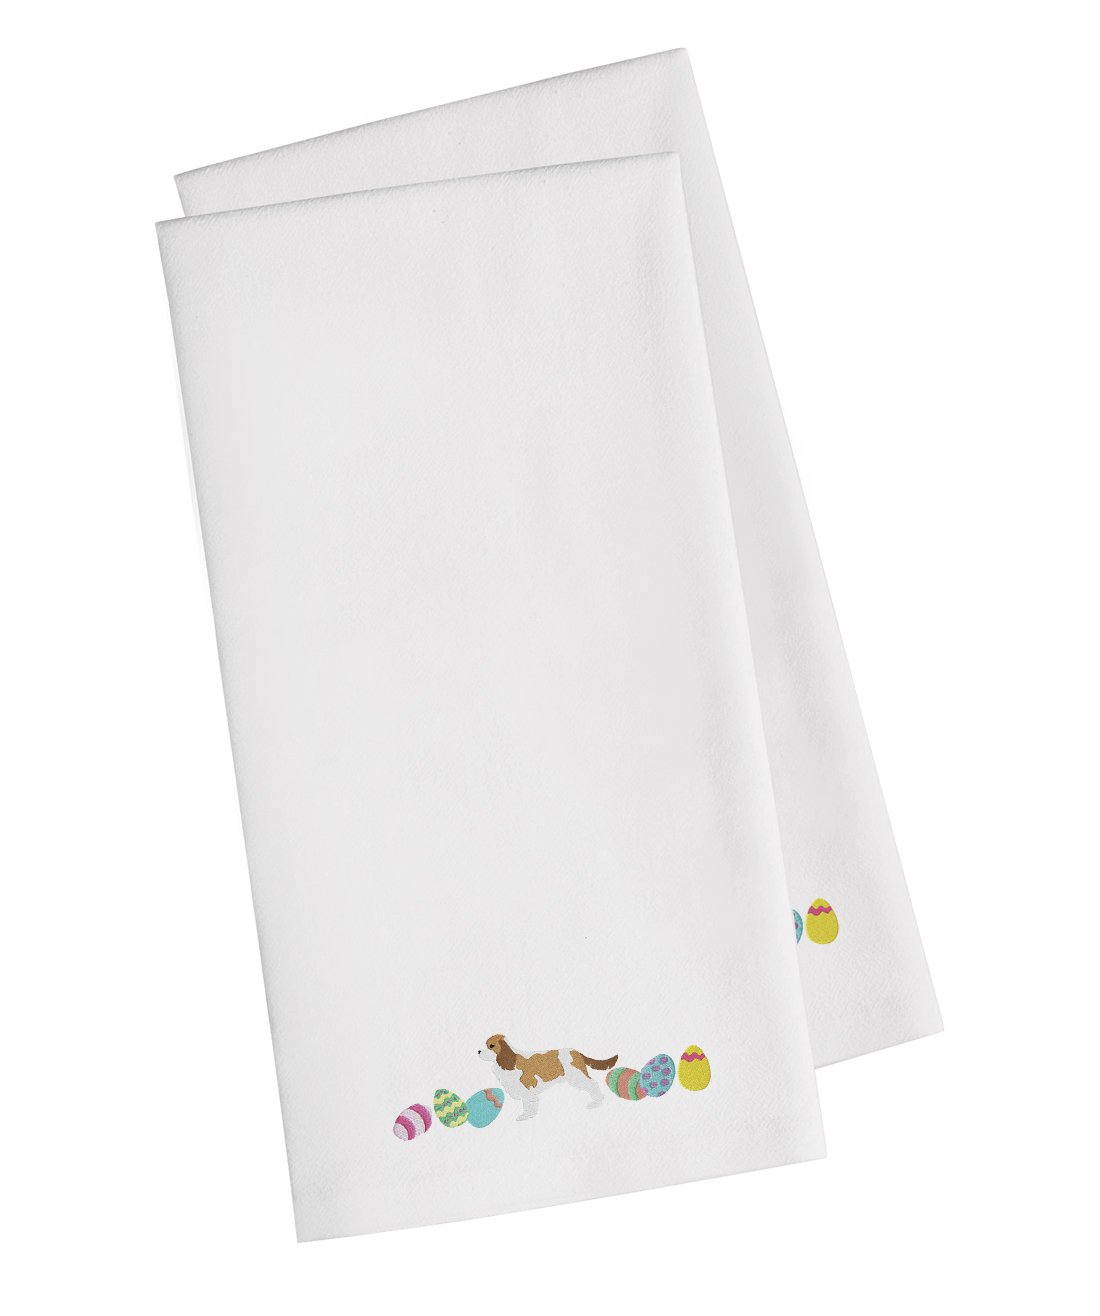 Cavalier Spaniel Easter White Embroidered Kitchen Towel Set of 2 CK1622WHTWE by Caroline's Treasures